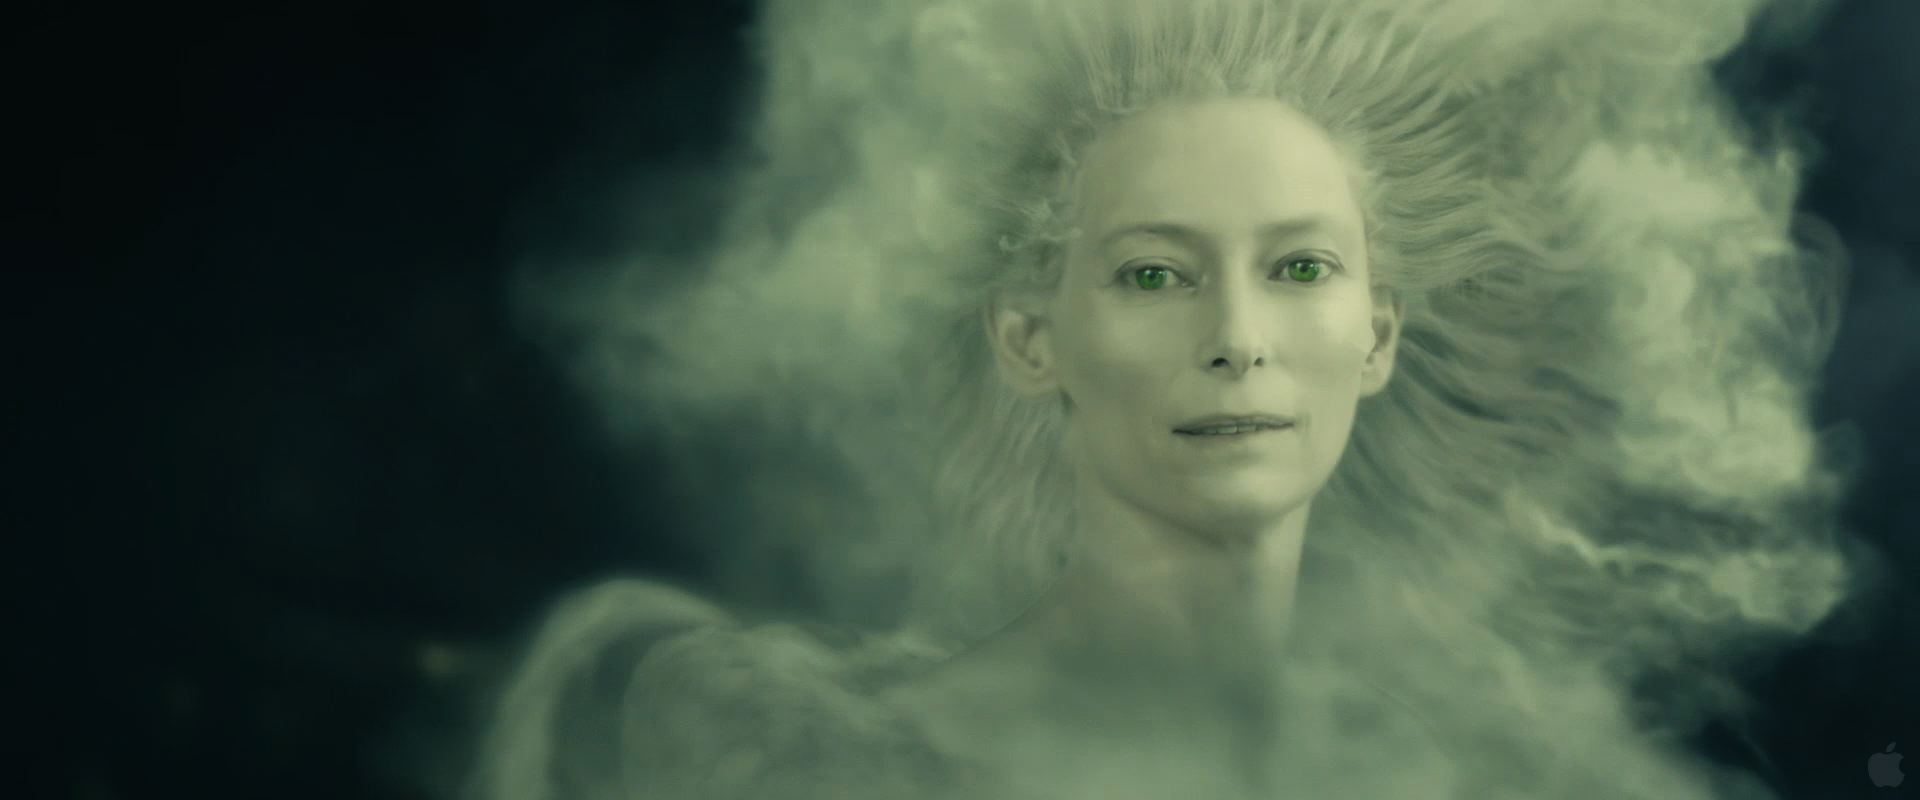 The Evil White Witch Jadis From Chronicles Of Narnia Voyage